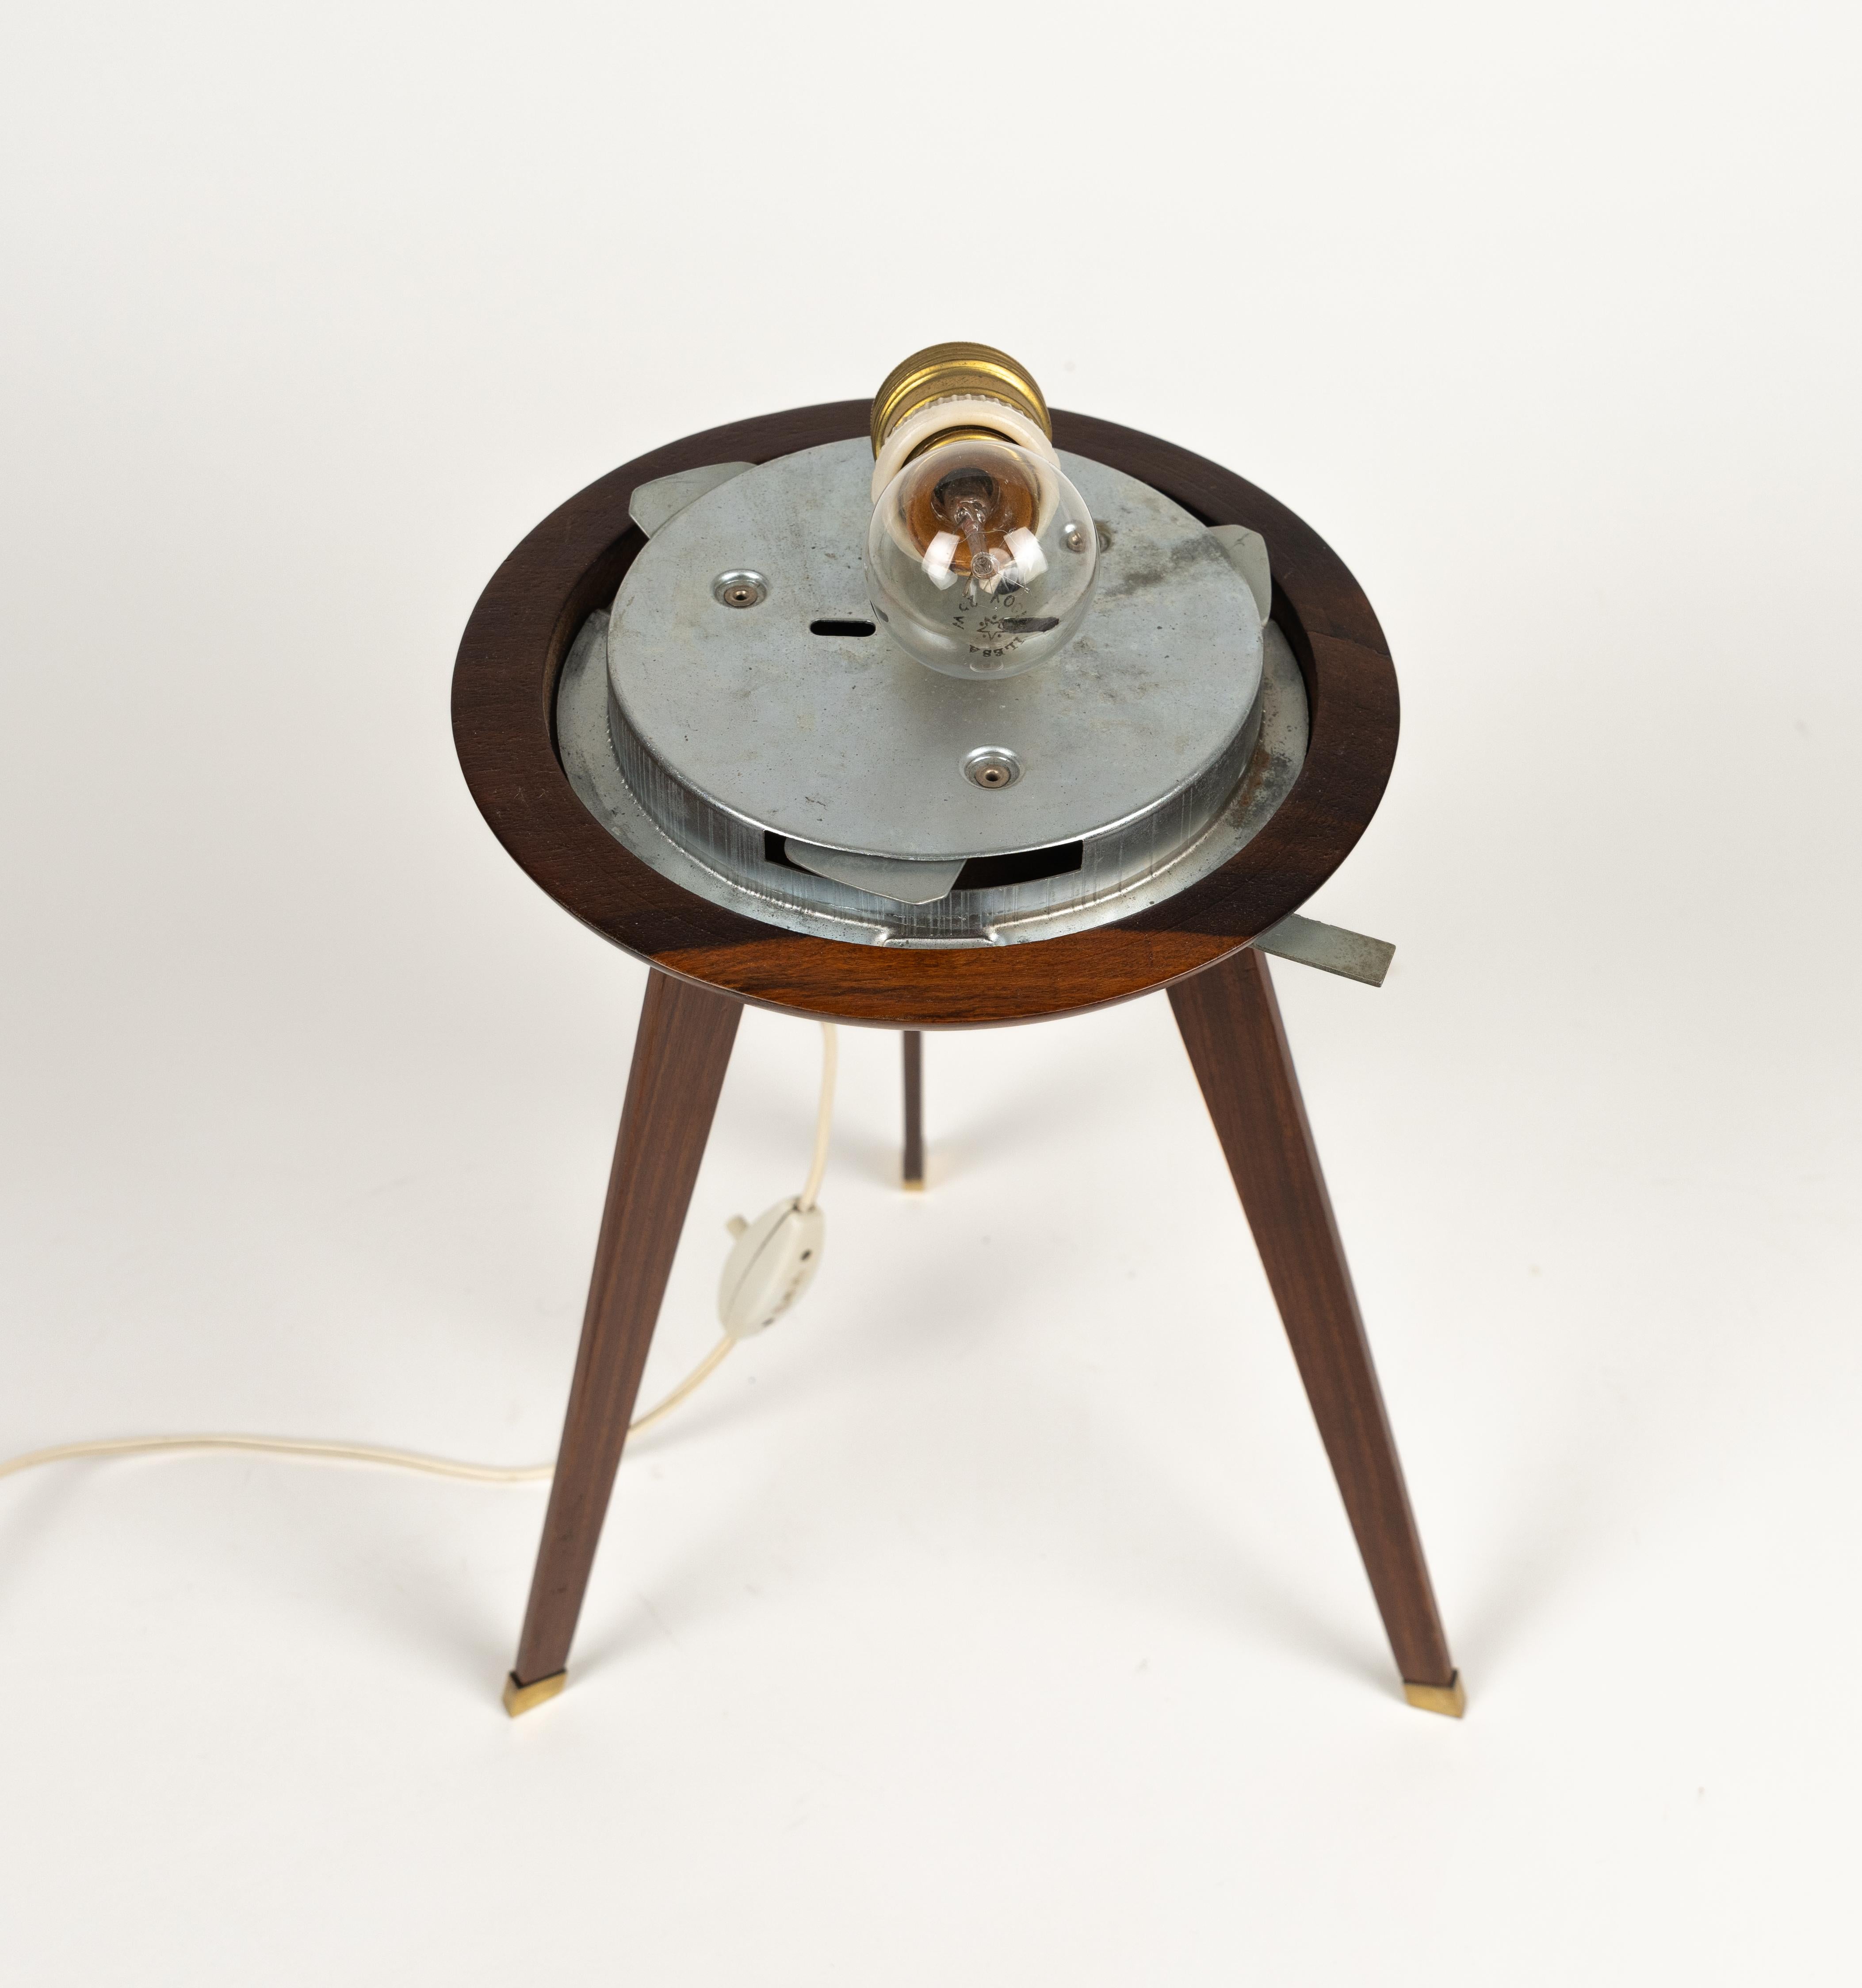 Mid-20th Century Tripod Table Lamp in Teak, Opaline Glass and Brass Stilnovo Style, Italy 1960s For Sale